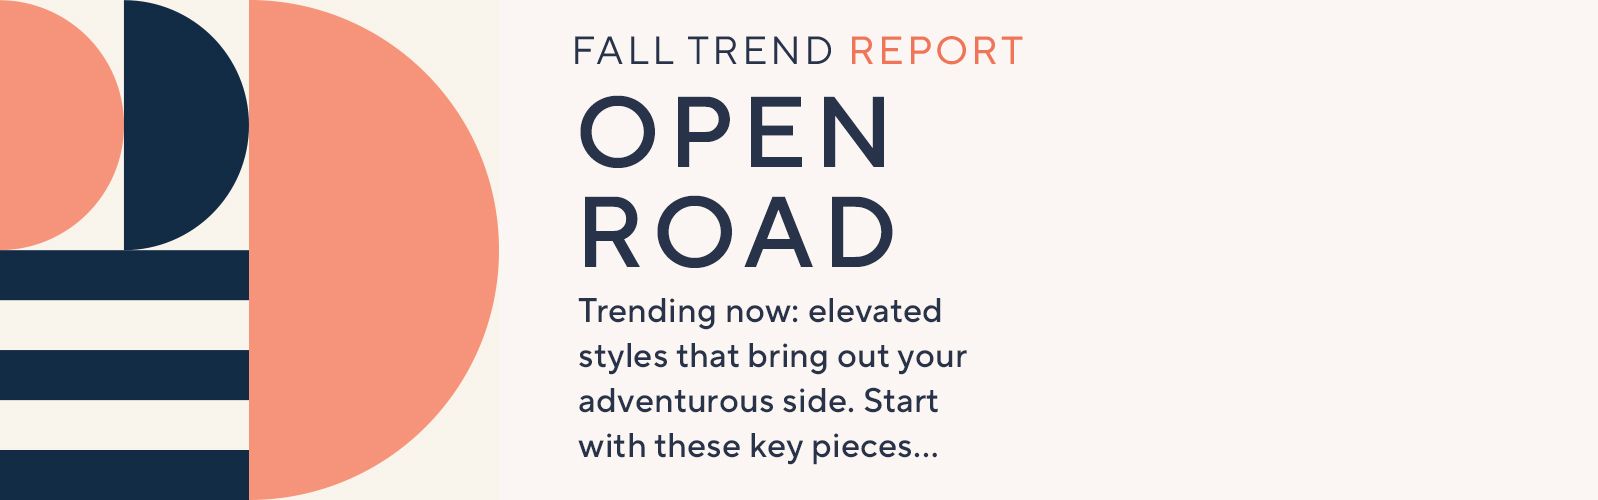 Fall Trend Report. Open Road. Trending now: elevated styles that bring out your adventurous side. Start with these key pieces…